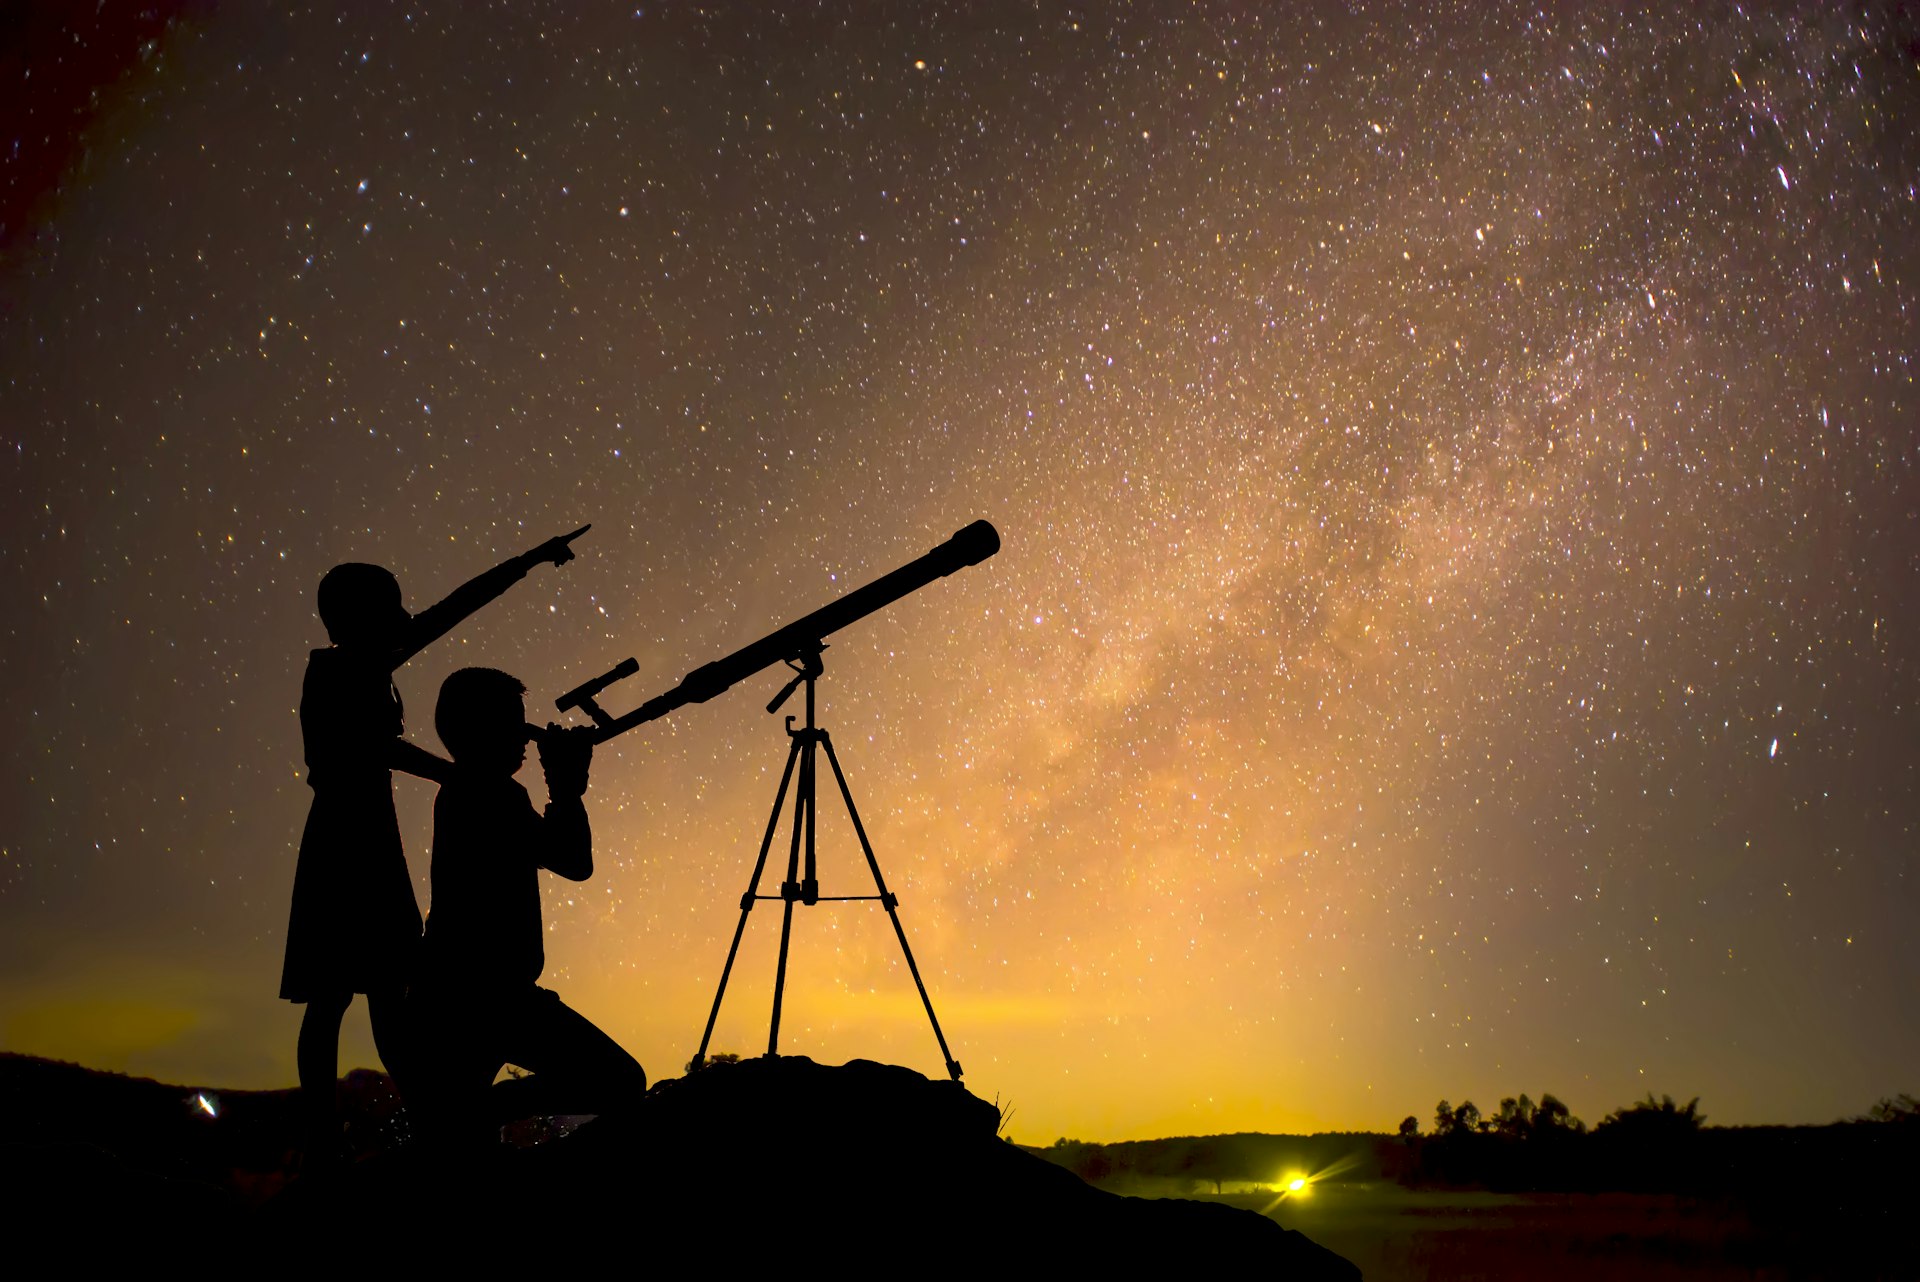 A child peering through a telescope while another points at the sky